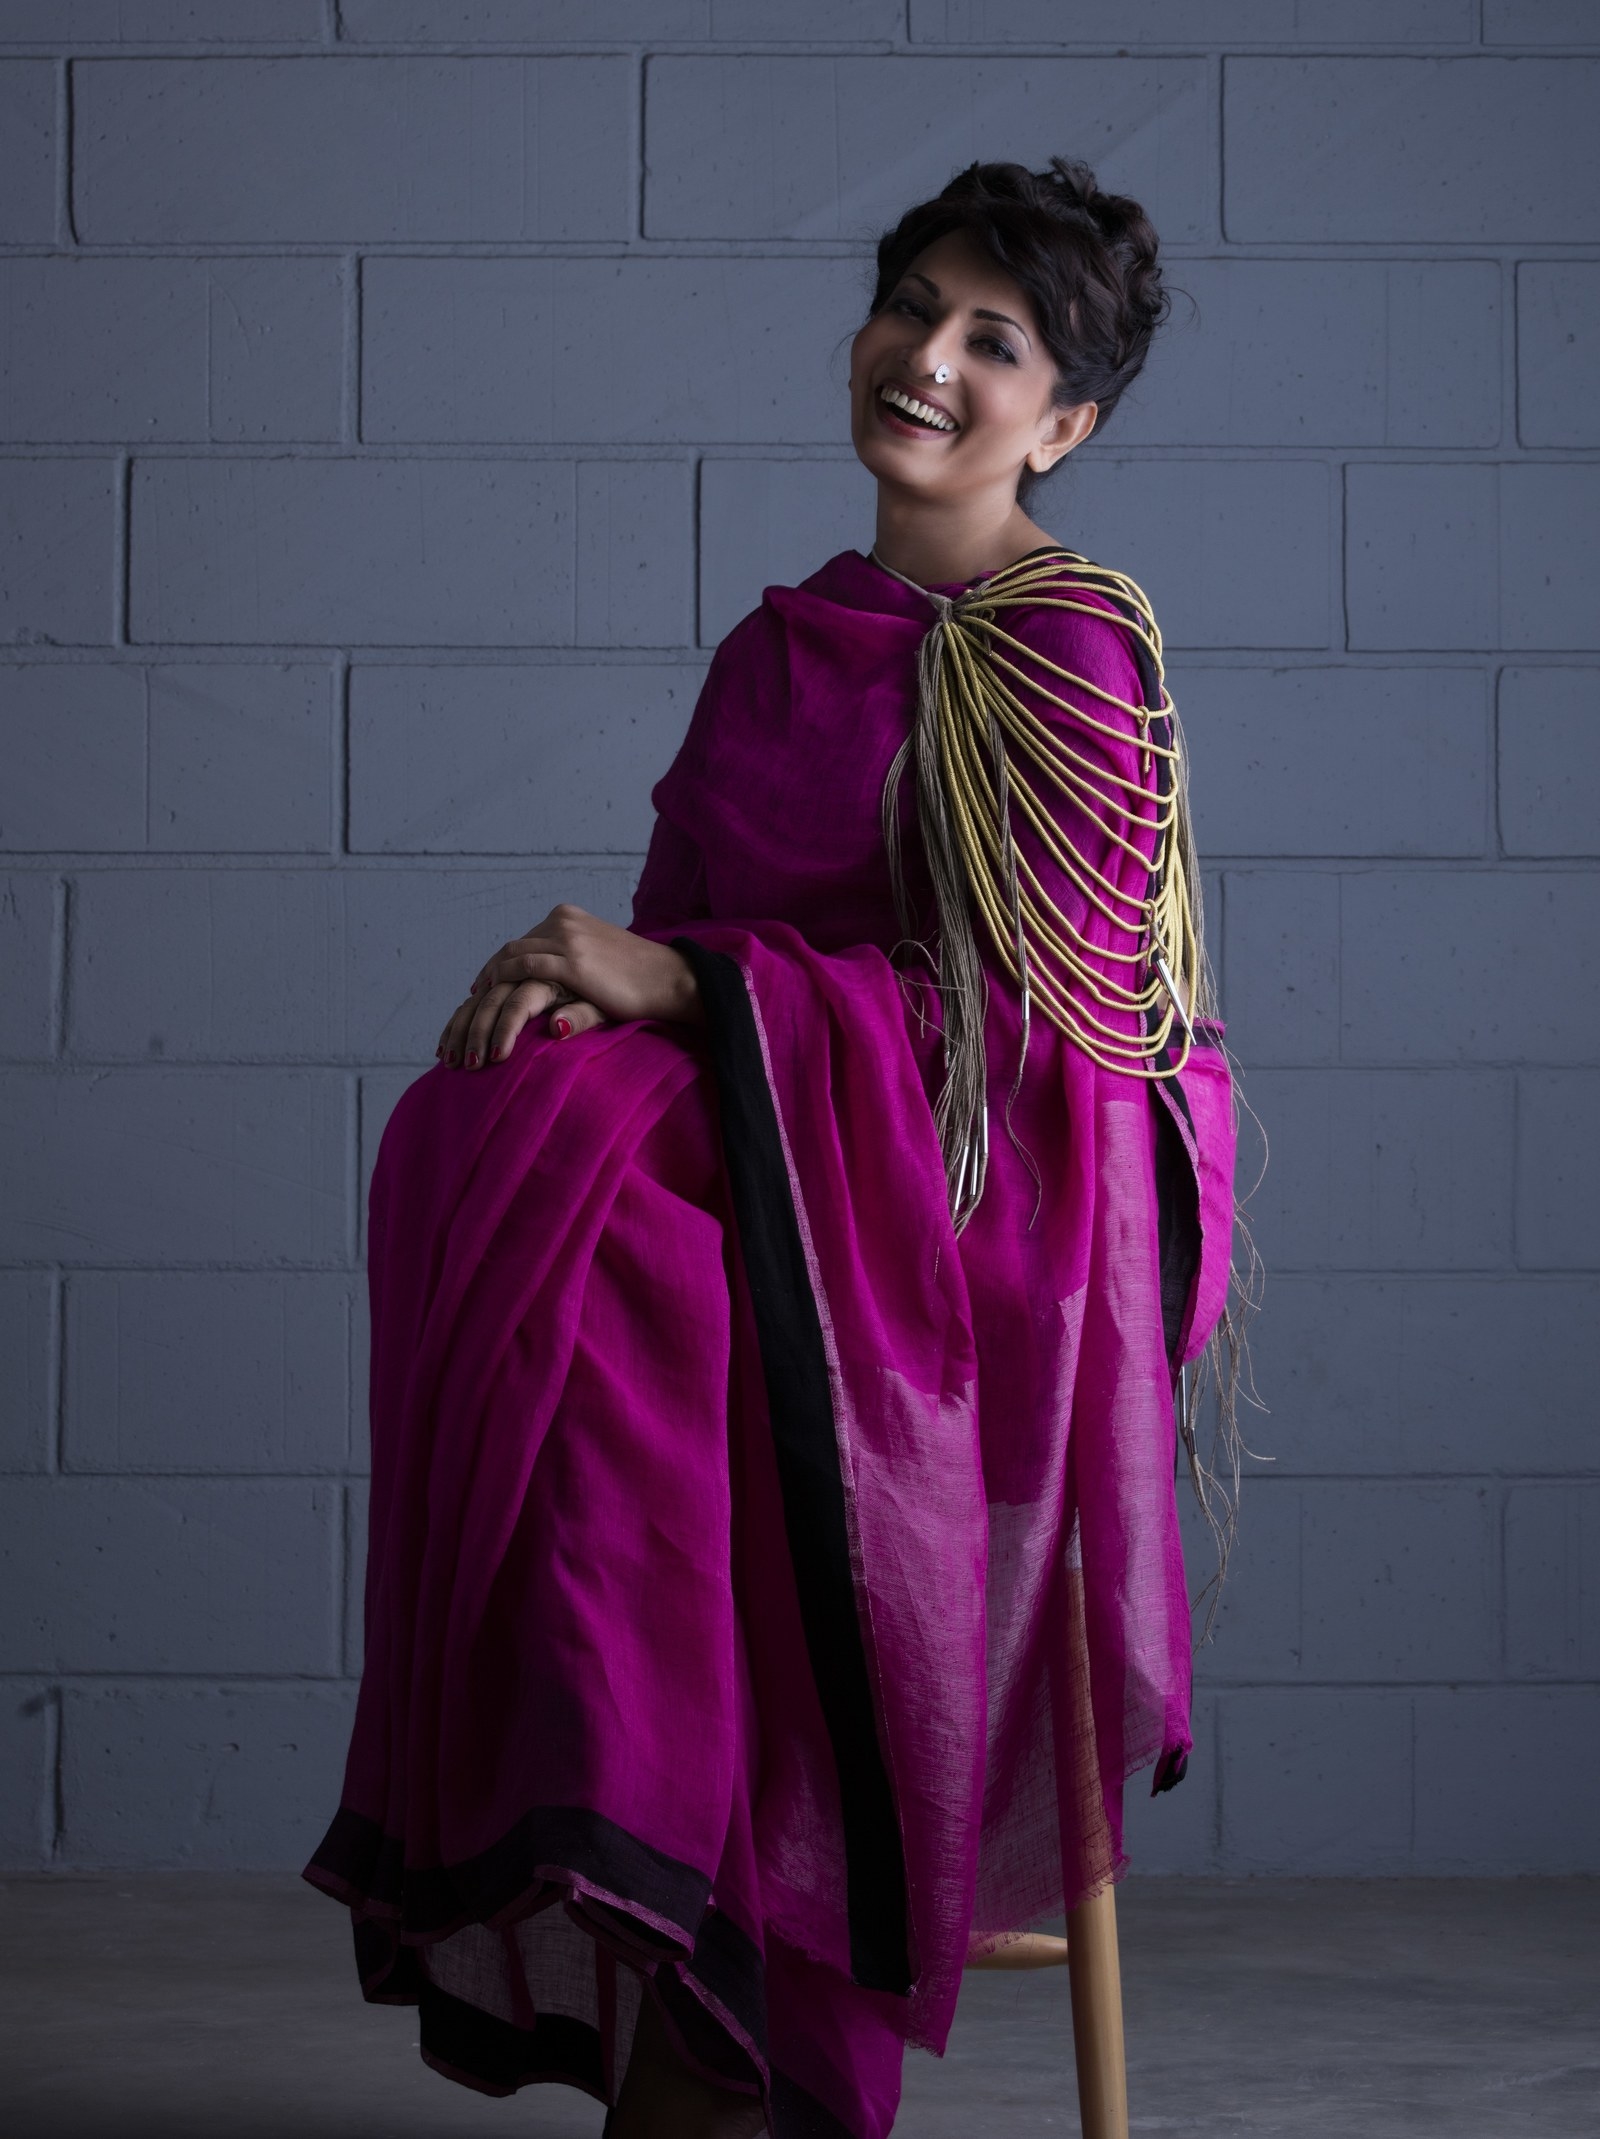 These Stunning Transgender Dancers Were Draped In Saris By Indian Designers